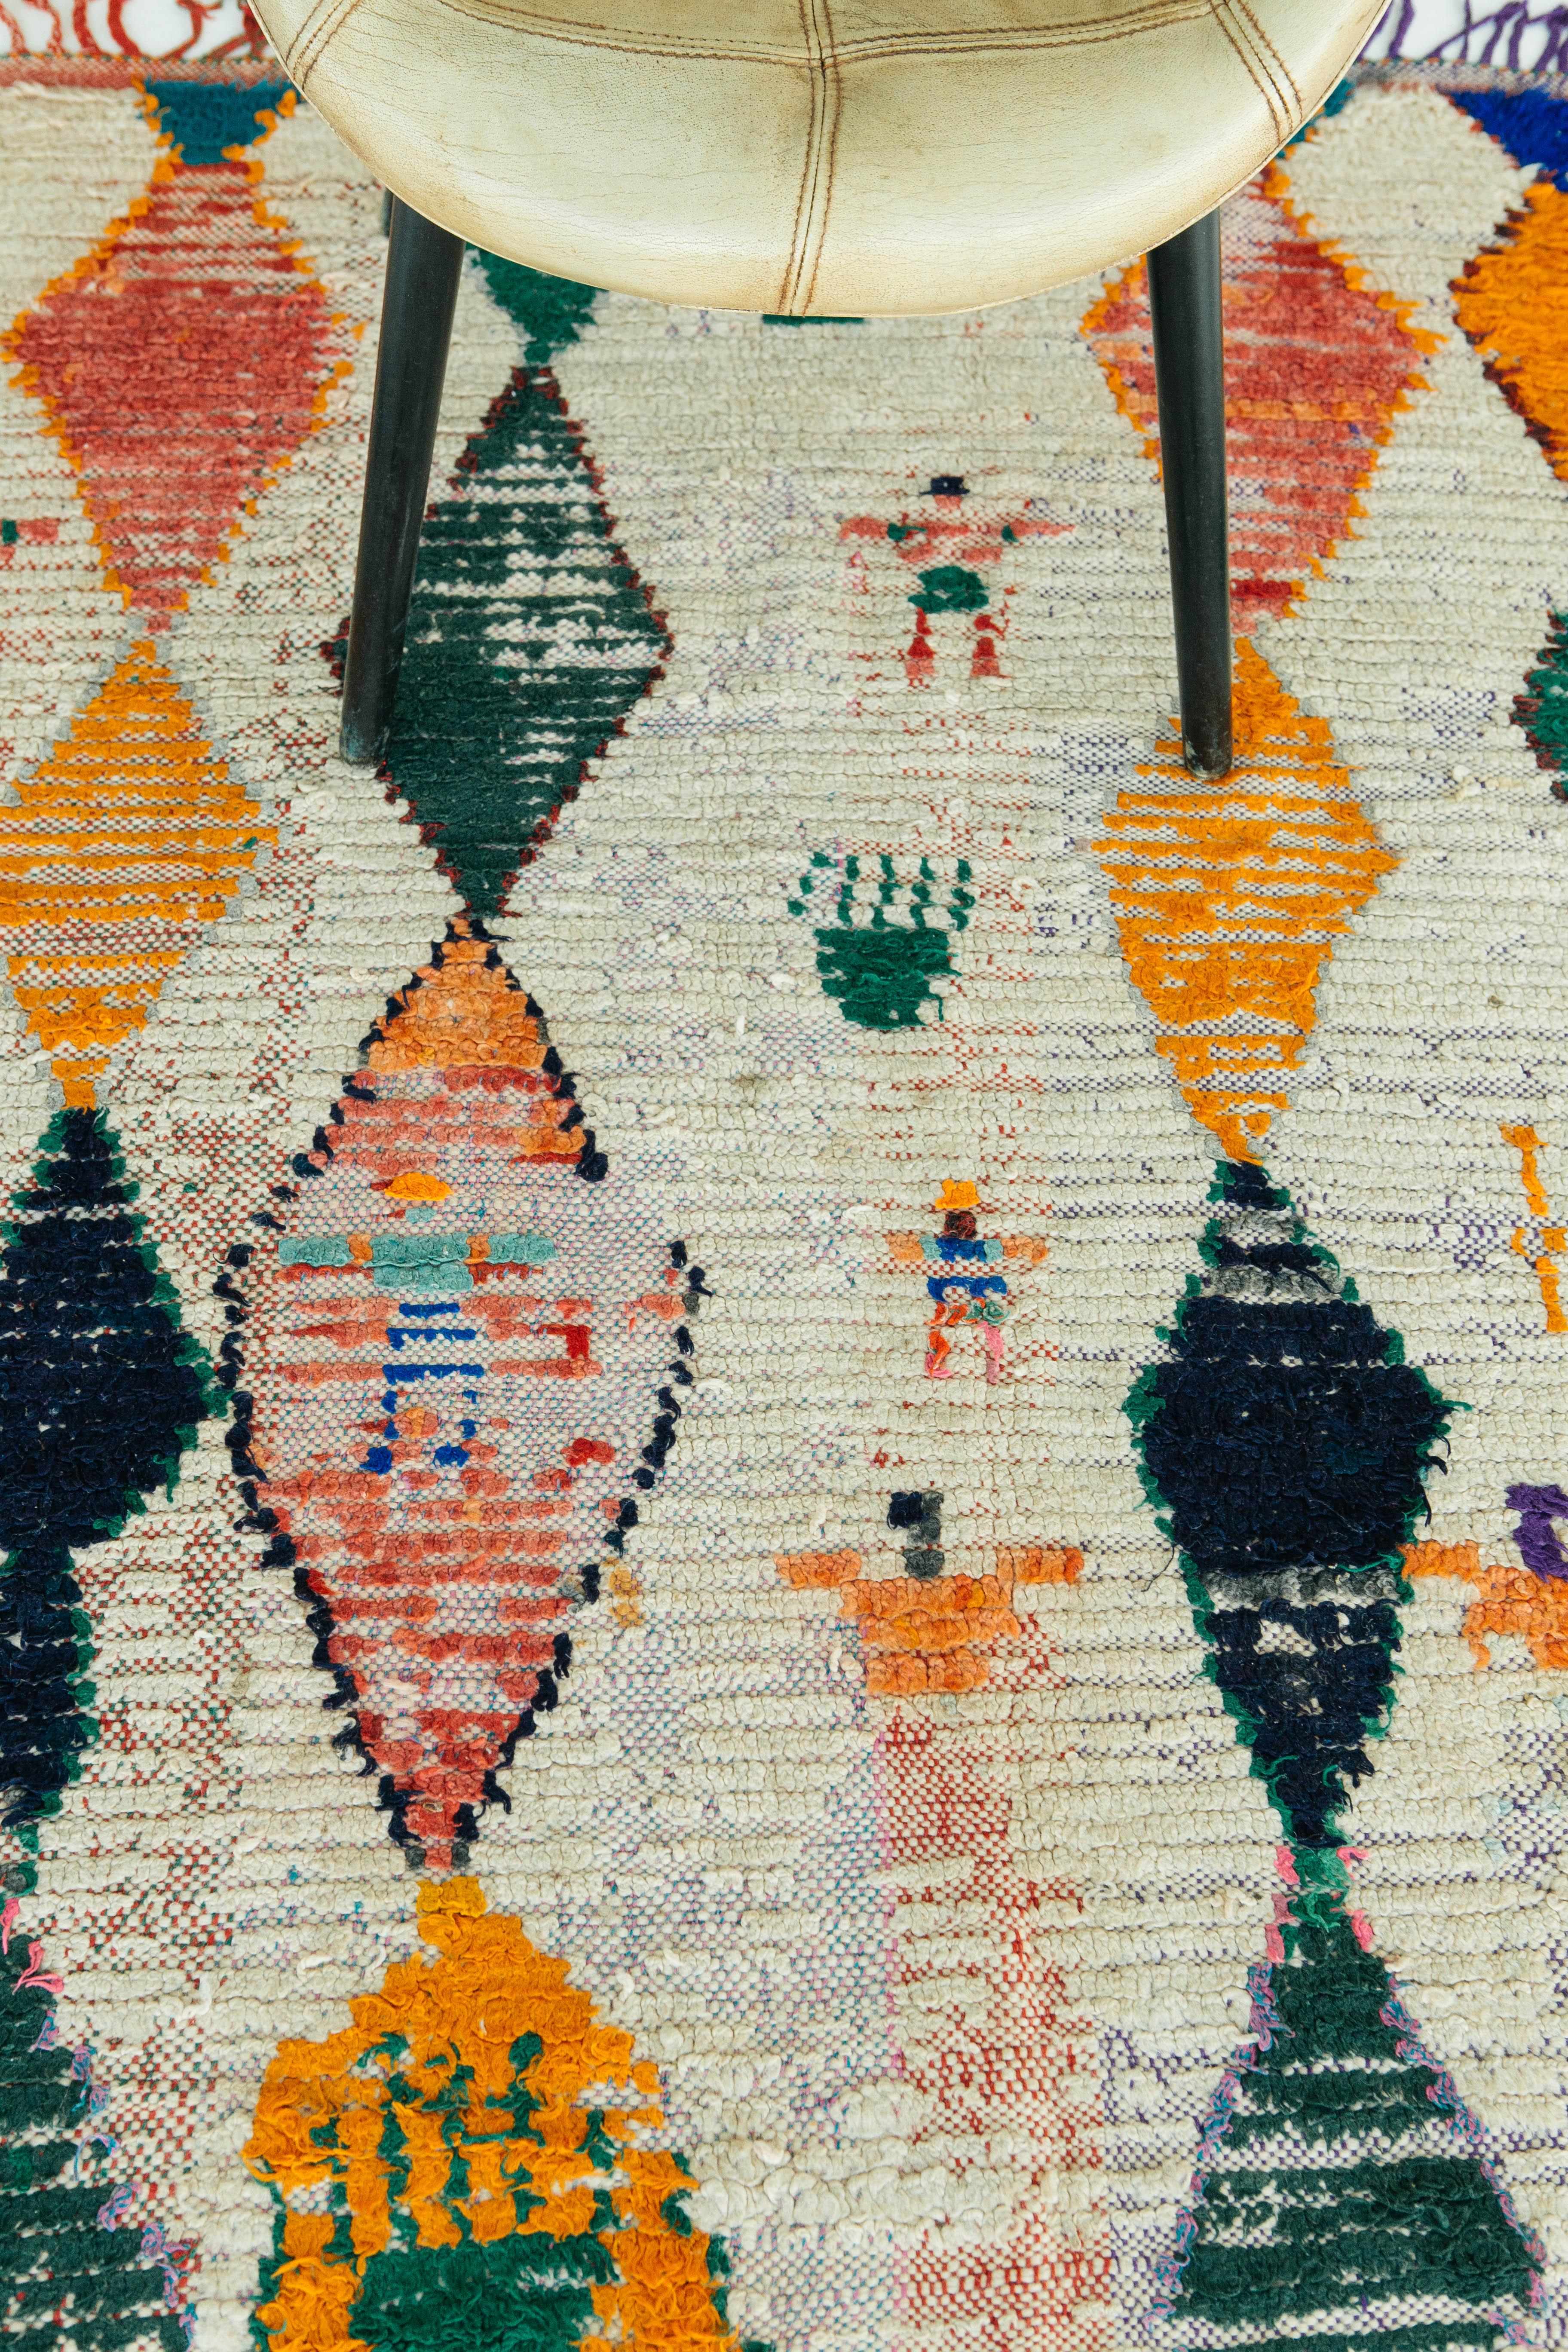 A cheerful Moroccan Azilal with colorful diamonds latticed through an ivory field. This rug is a one-of-a-kind vintage rug from the Azilal region in the Atlas Mountains of central Morocco. Tribal elements and playful fringe make for a unique and